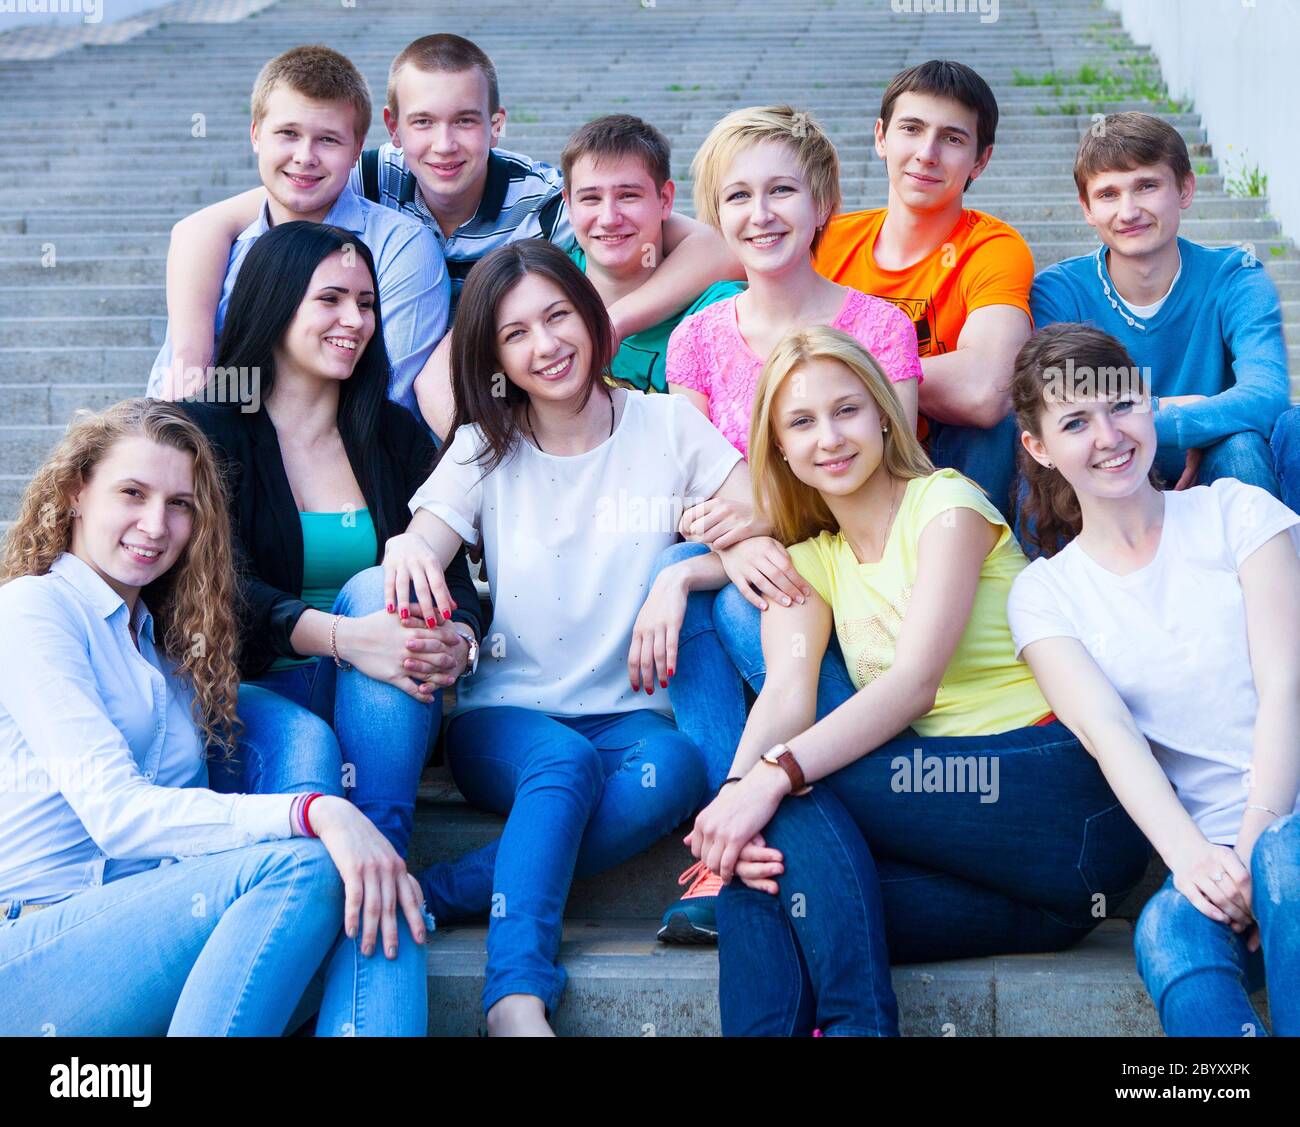 Group of smiling teenagers outdoors Stock Photo